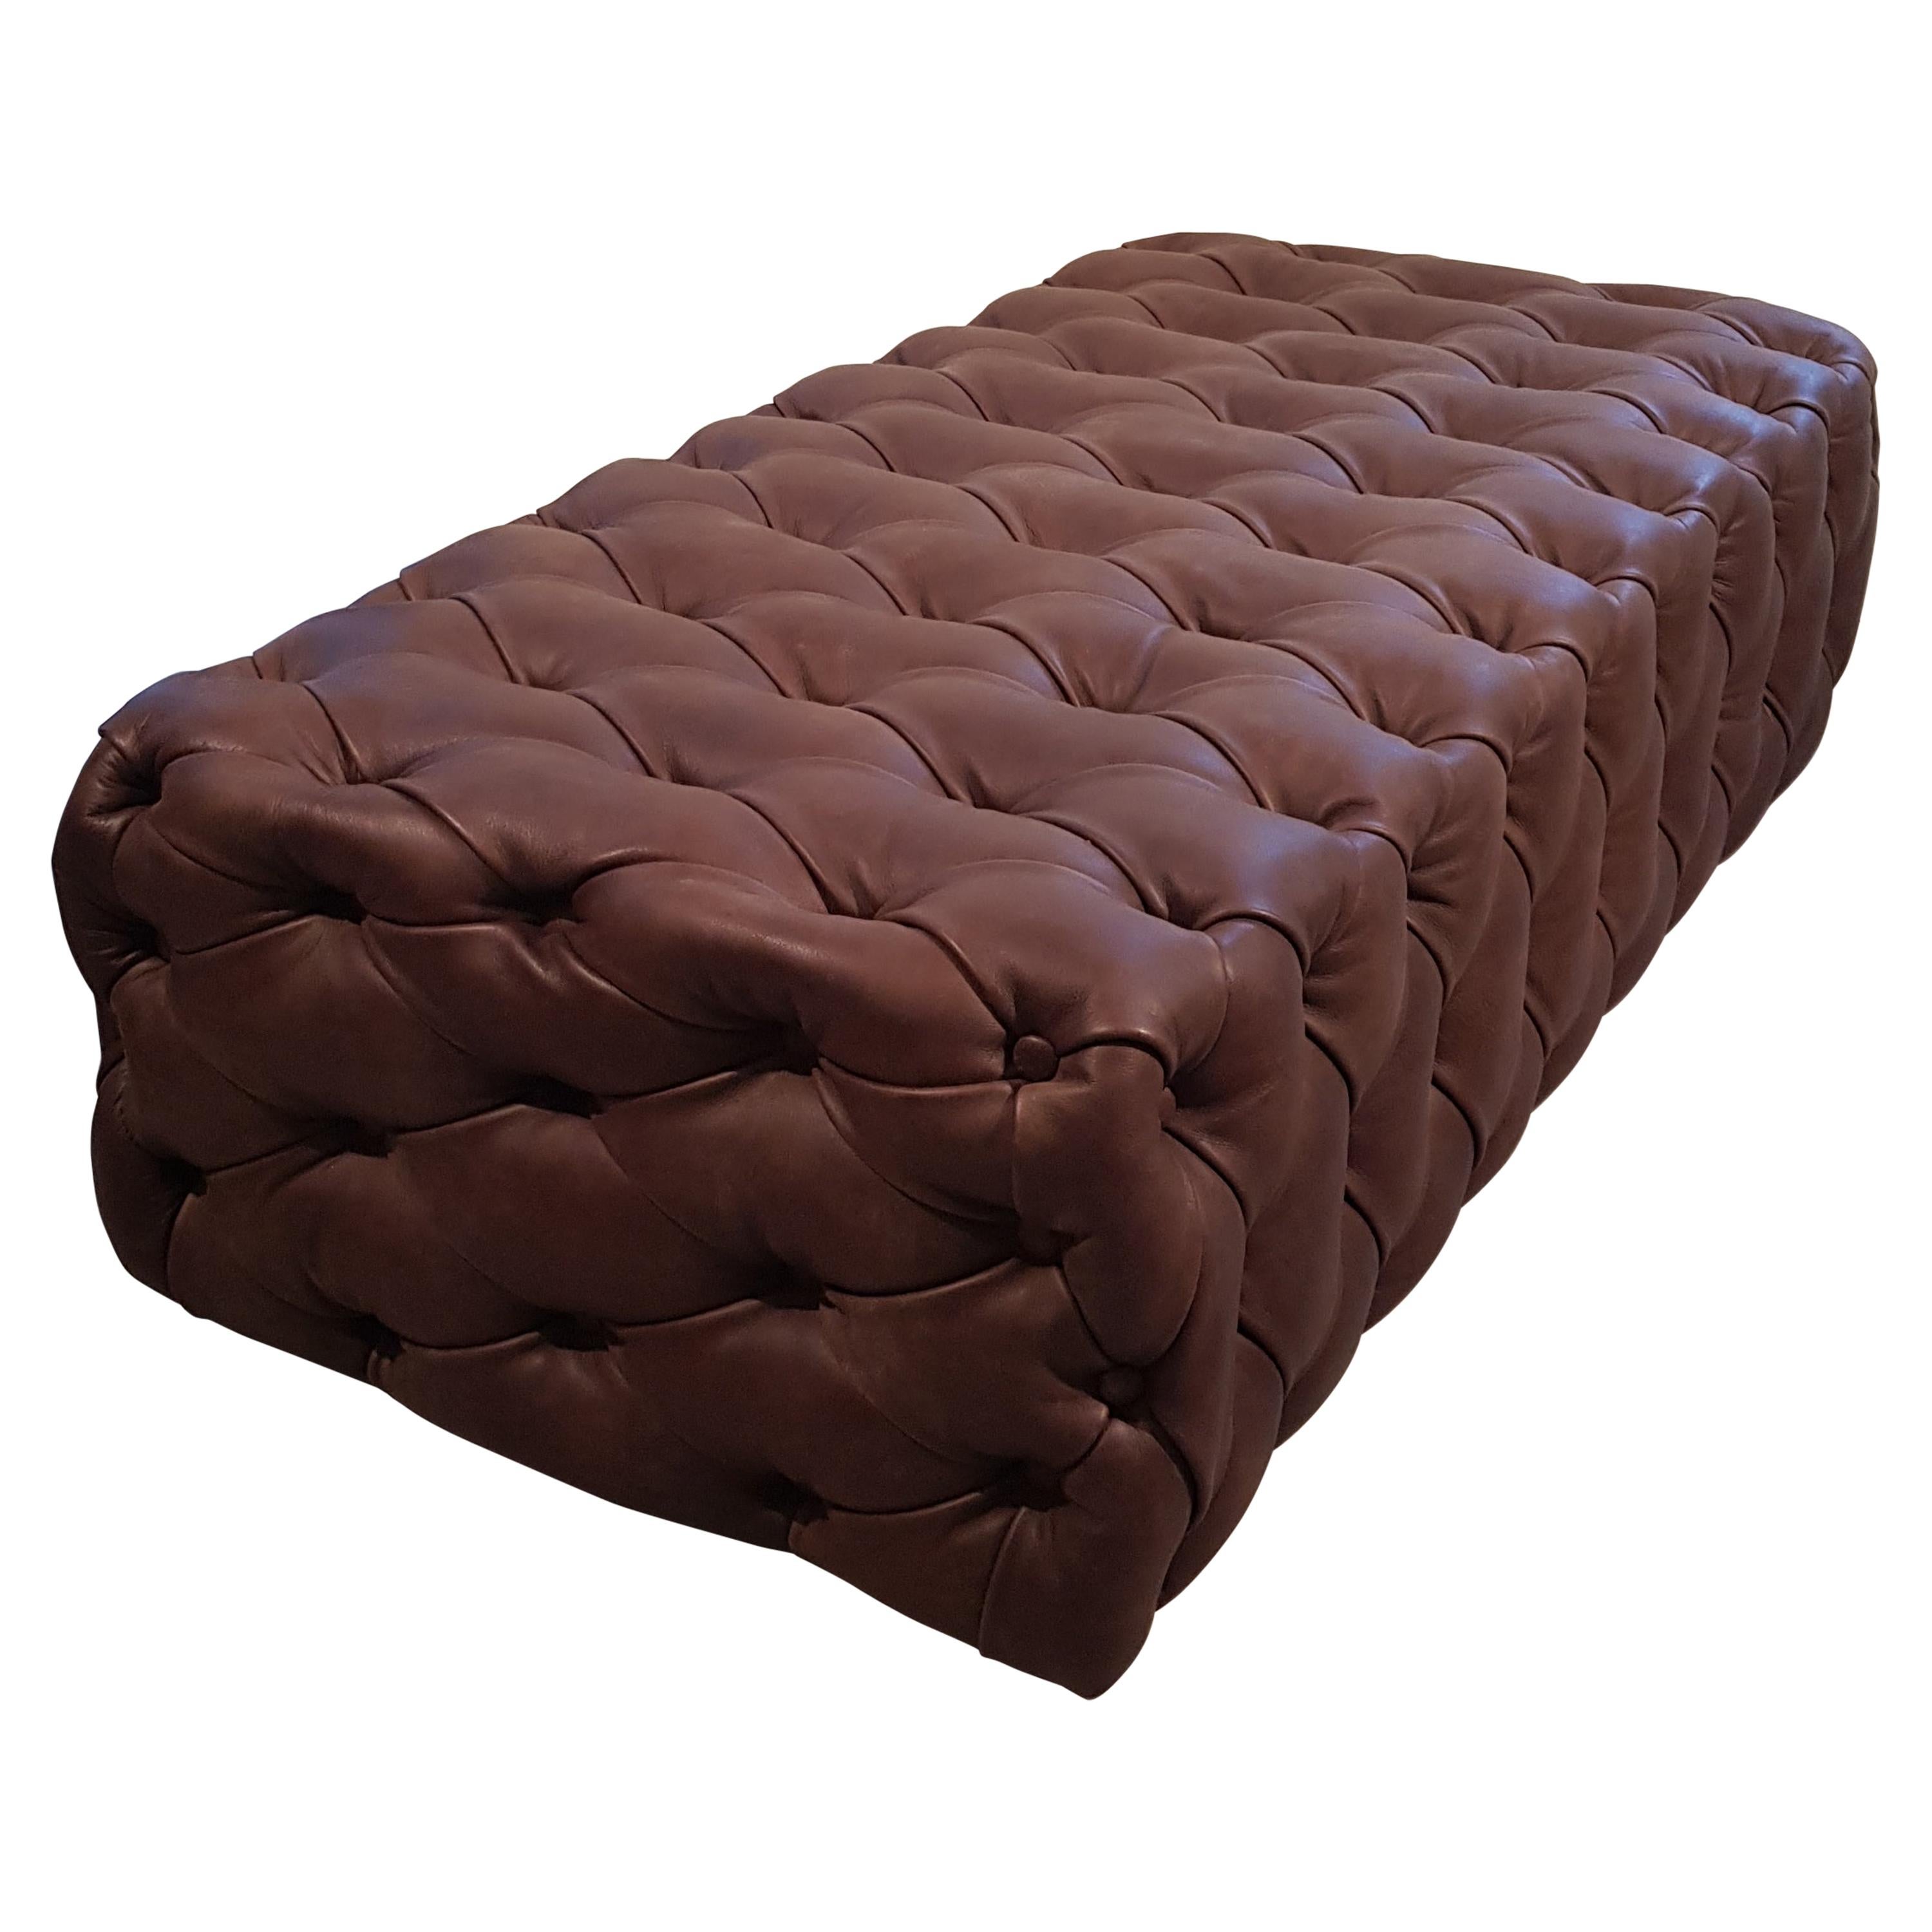 Customizable Brown Leather Capitonné Pouf Available in other colors shape size